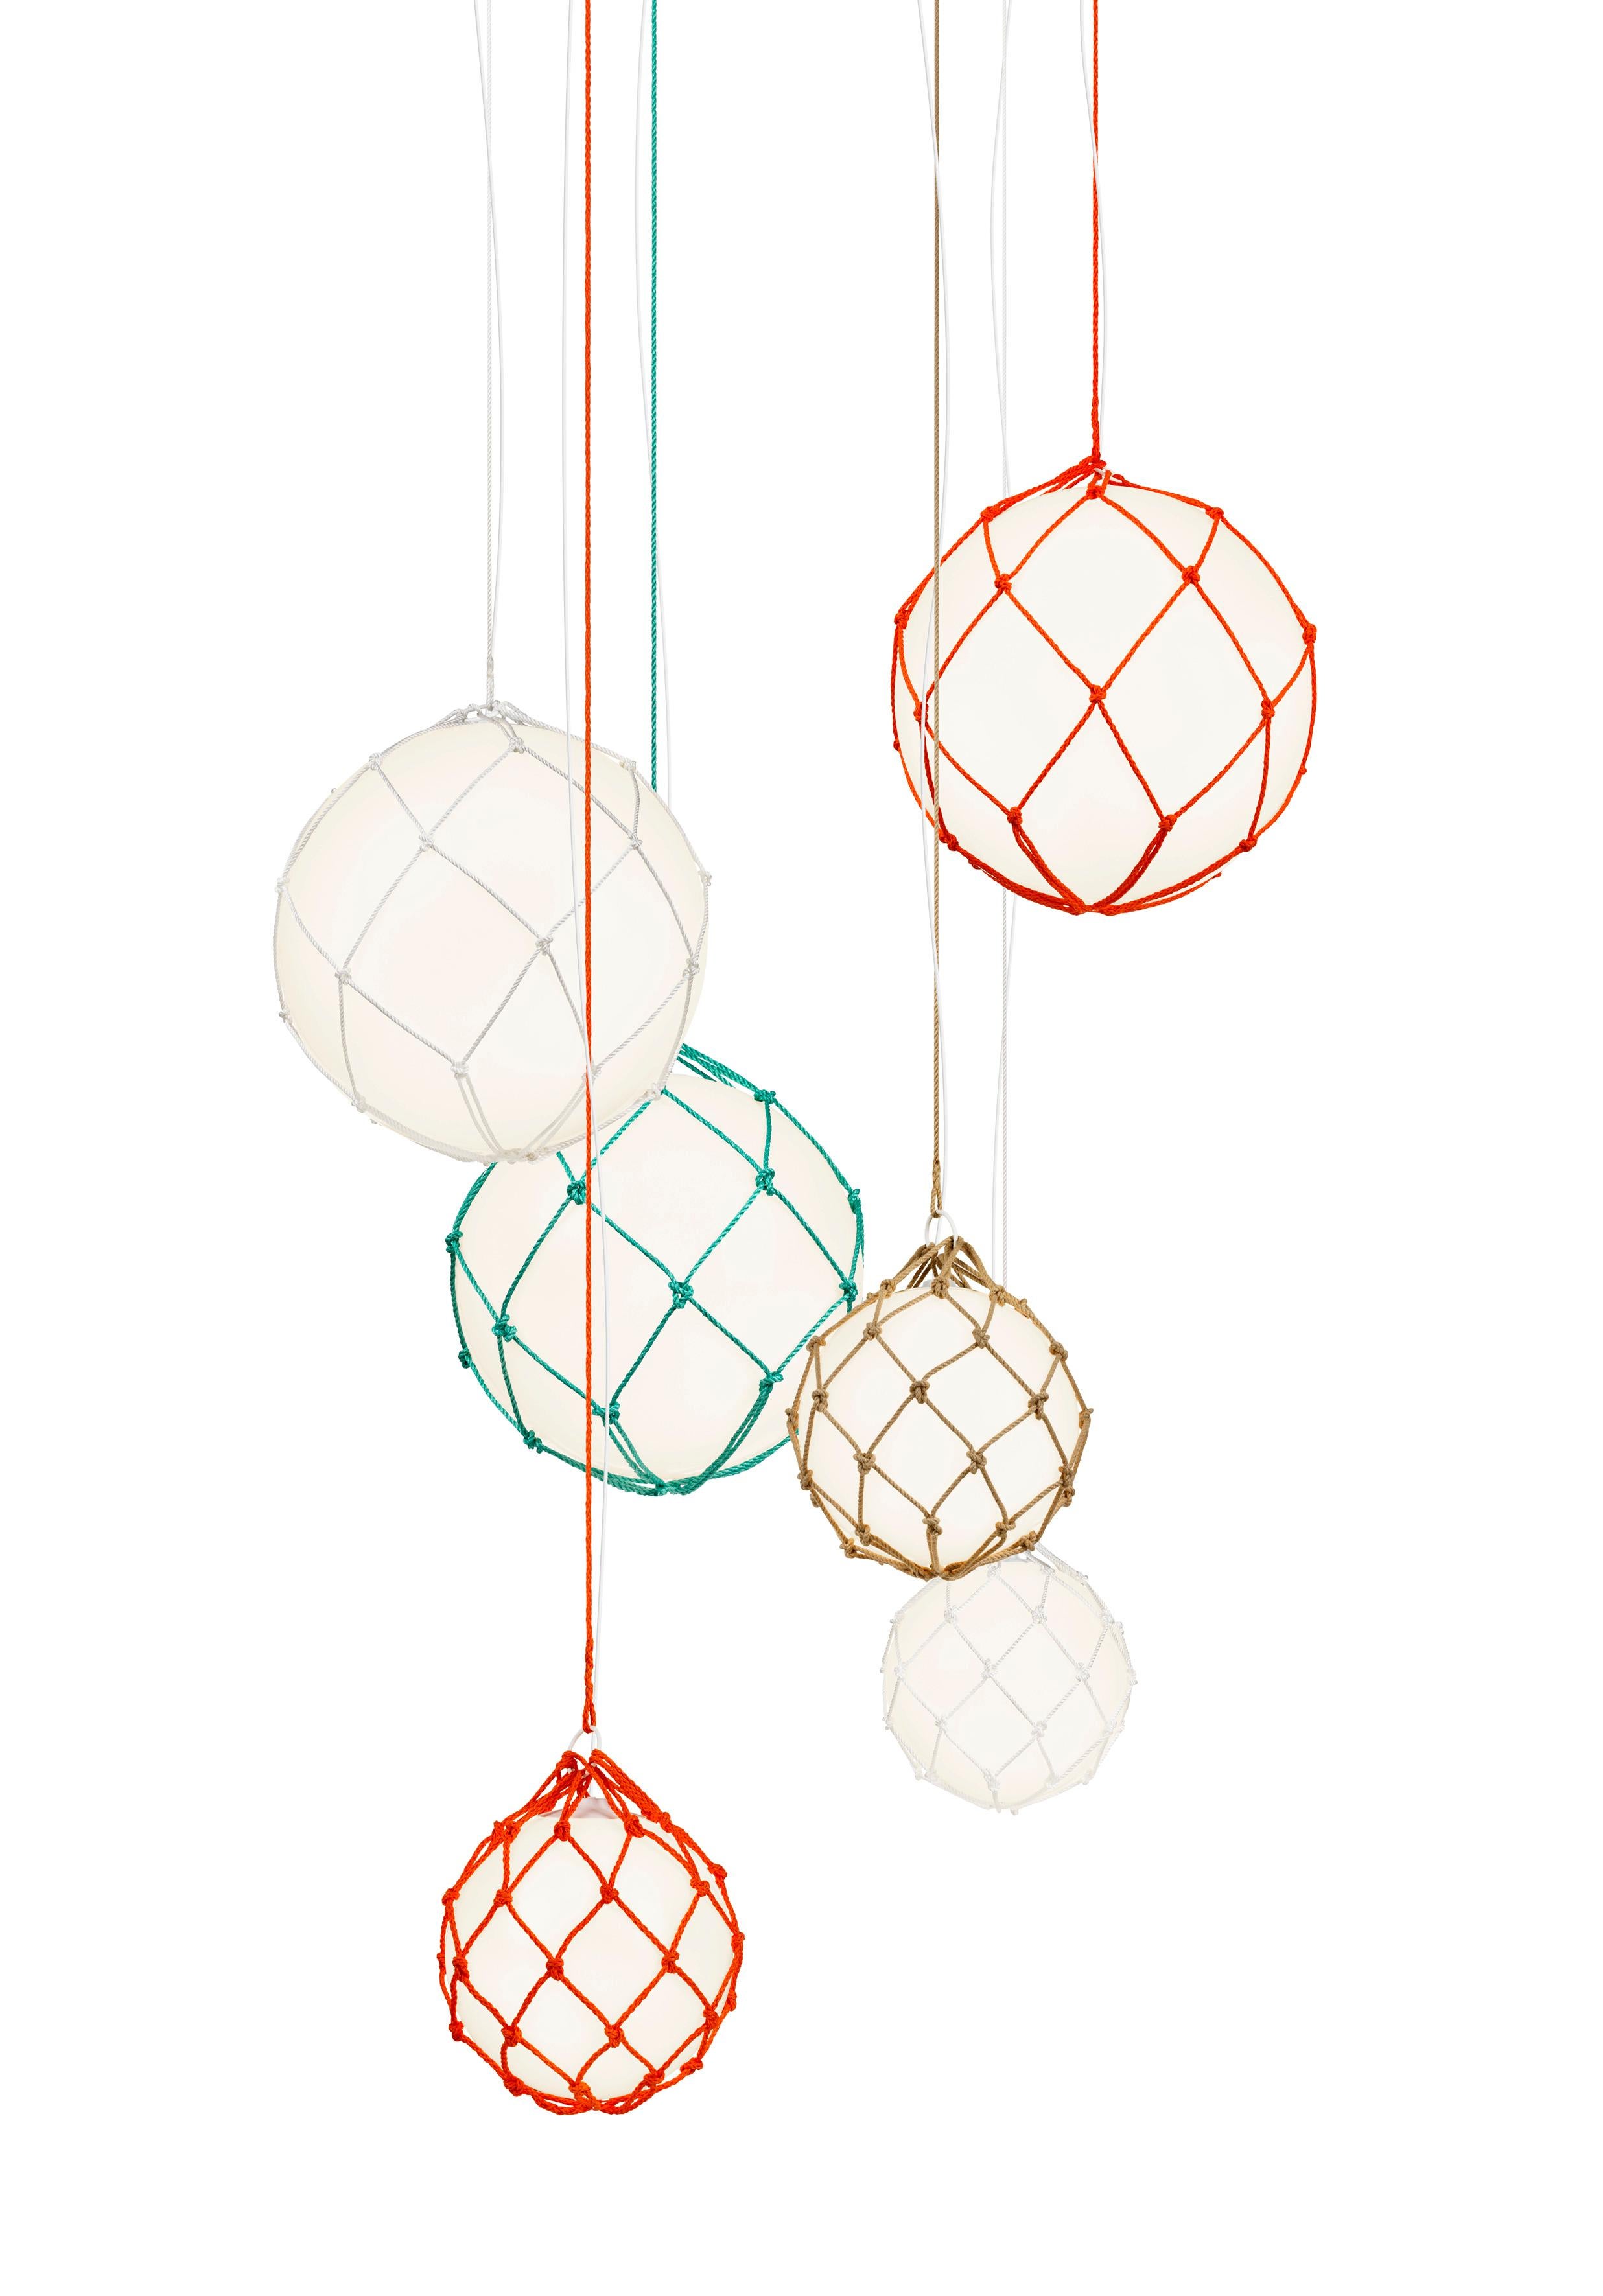 The handmade fisherman-cord nets that hold the round UV-stable polythene globes bring with the Fisherman pendant, designed by Mattias Ståhlbom, the feel of beachside living. Standard net colors are white, orange and natural. Mix and match sizes—11.8